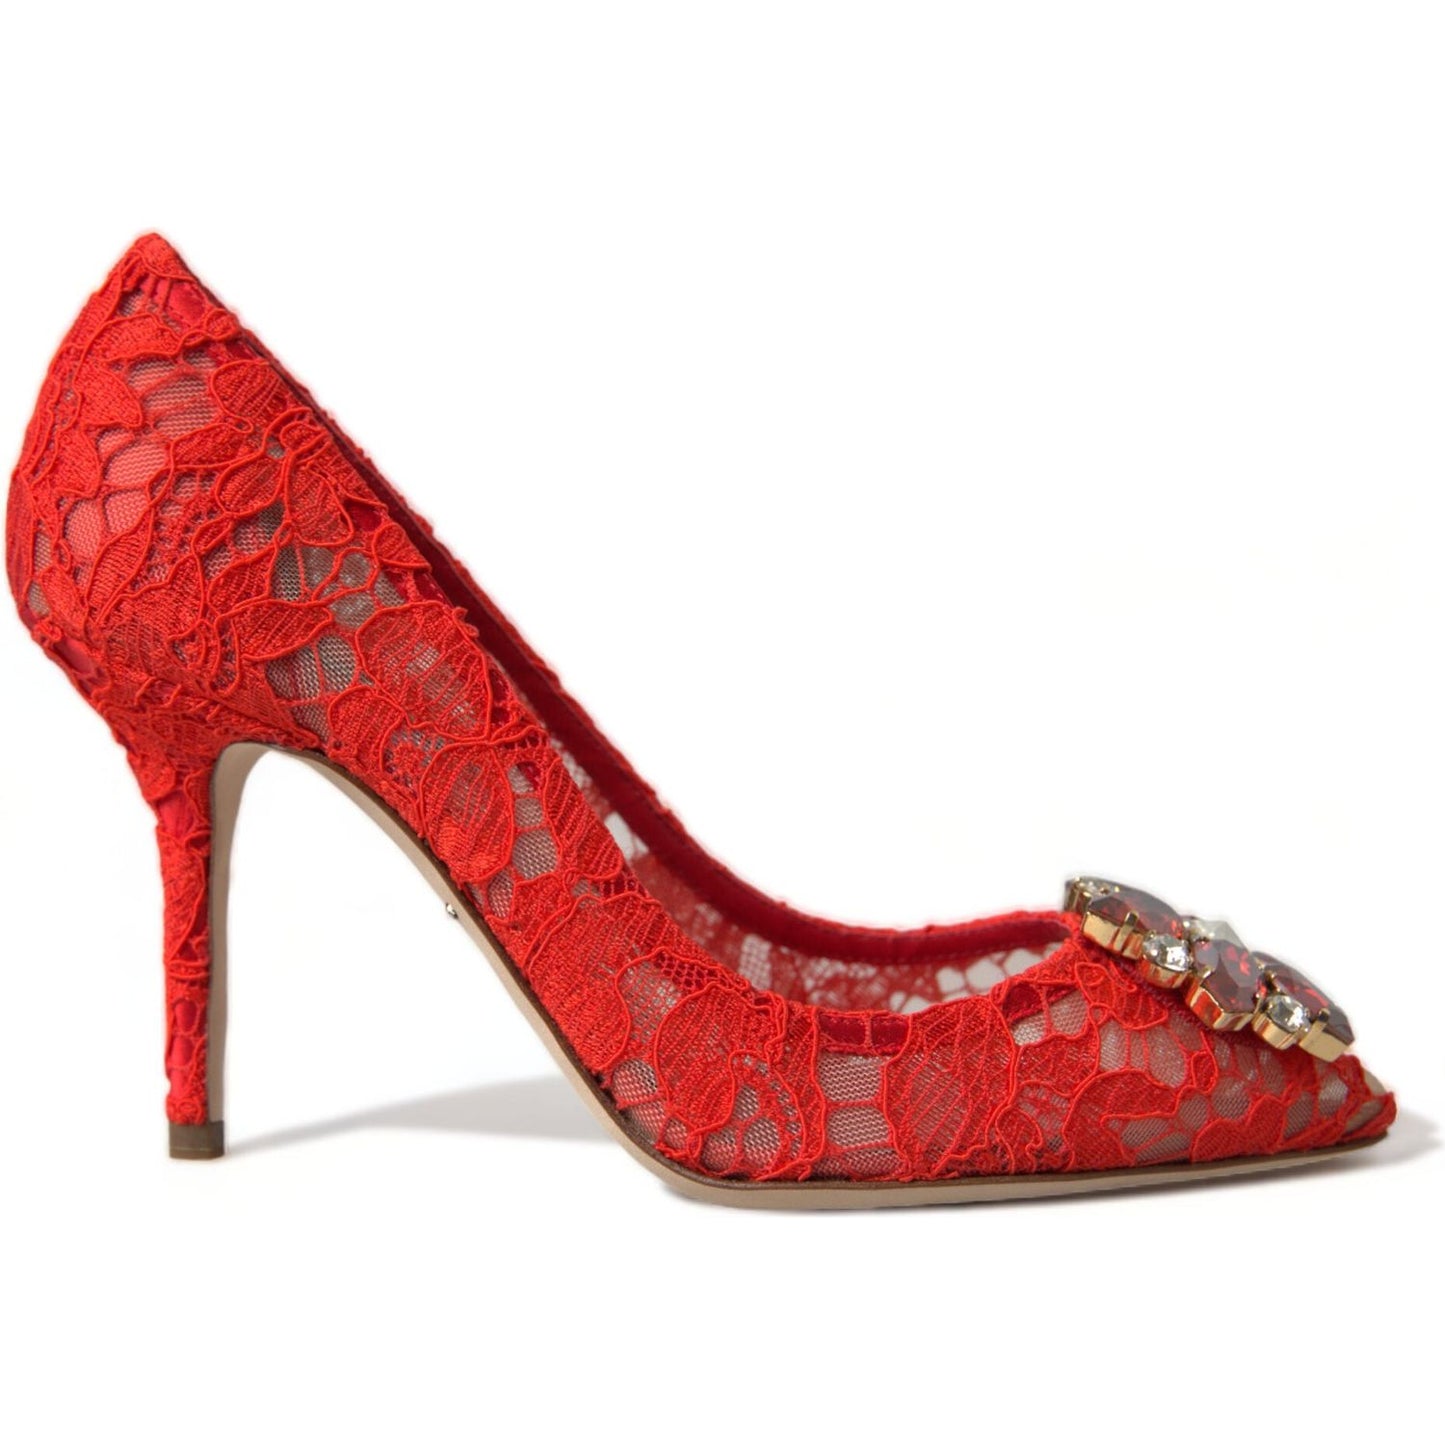 Dolce & Gabbana Exquisite Crystal-Embellished Red Lace Heels red-taormina-lace-crystal-heels-pumps-shoes-1 465A9196-bg-scaled-99500901-e10.jpg